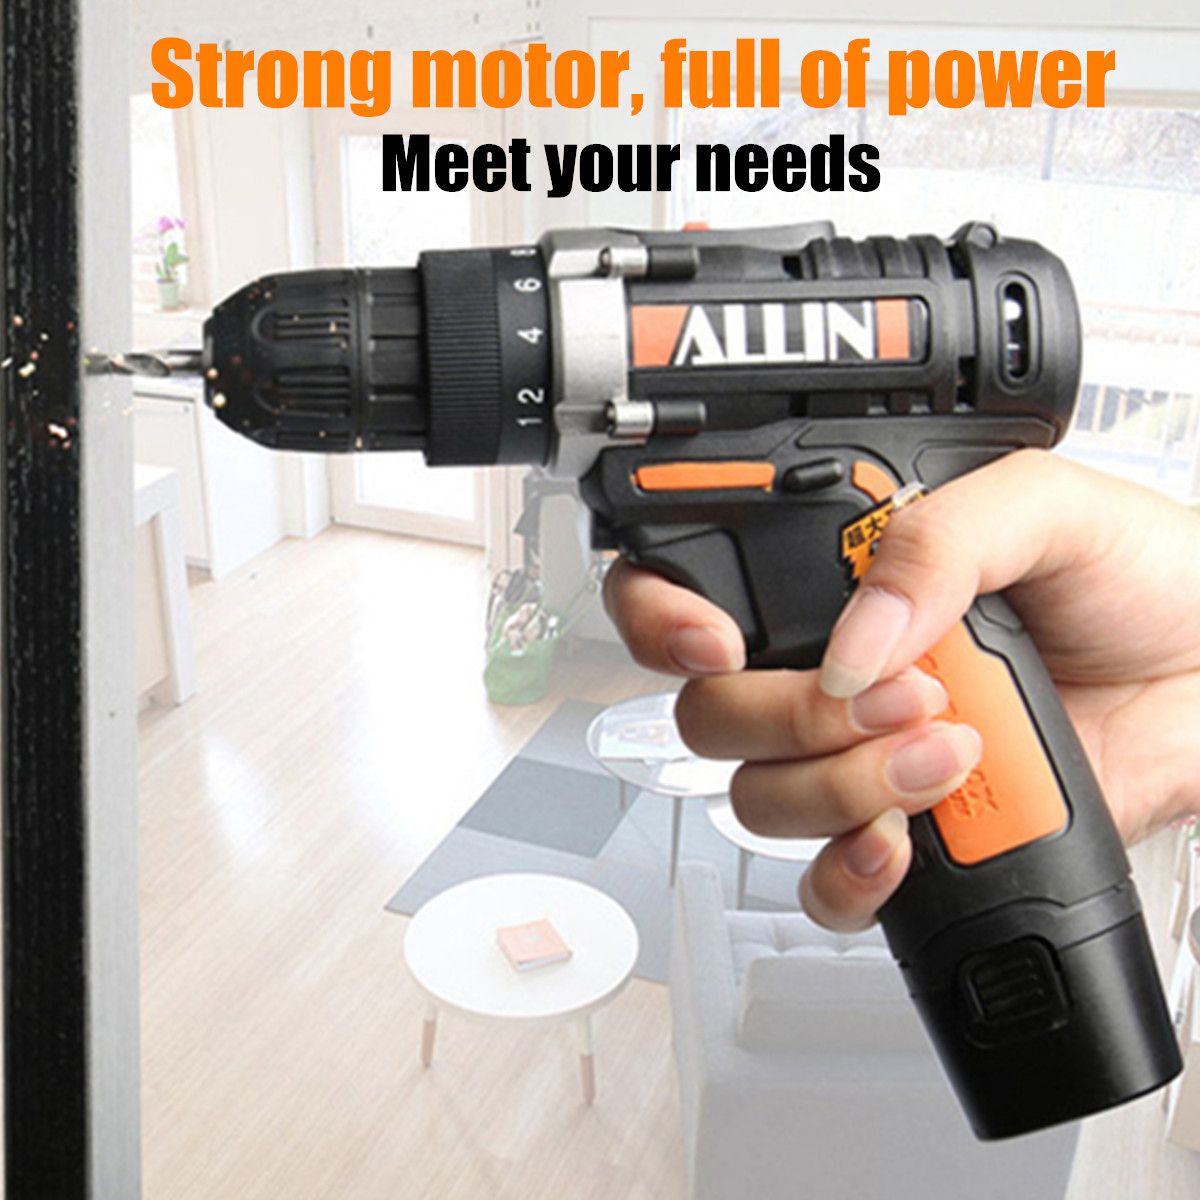 12V-15-Ah-Lithium-Battery-Power-Drill-Cordless-Electric-Hand-Drill-Bits-Set-Rechargeable-2-Speed-Ele-1571968